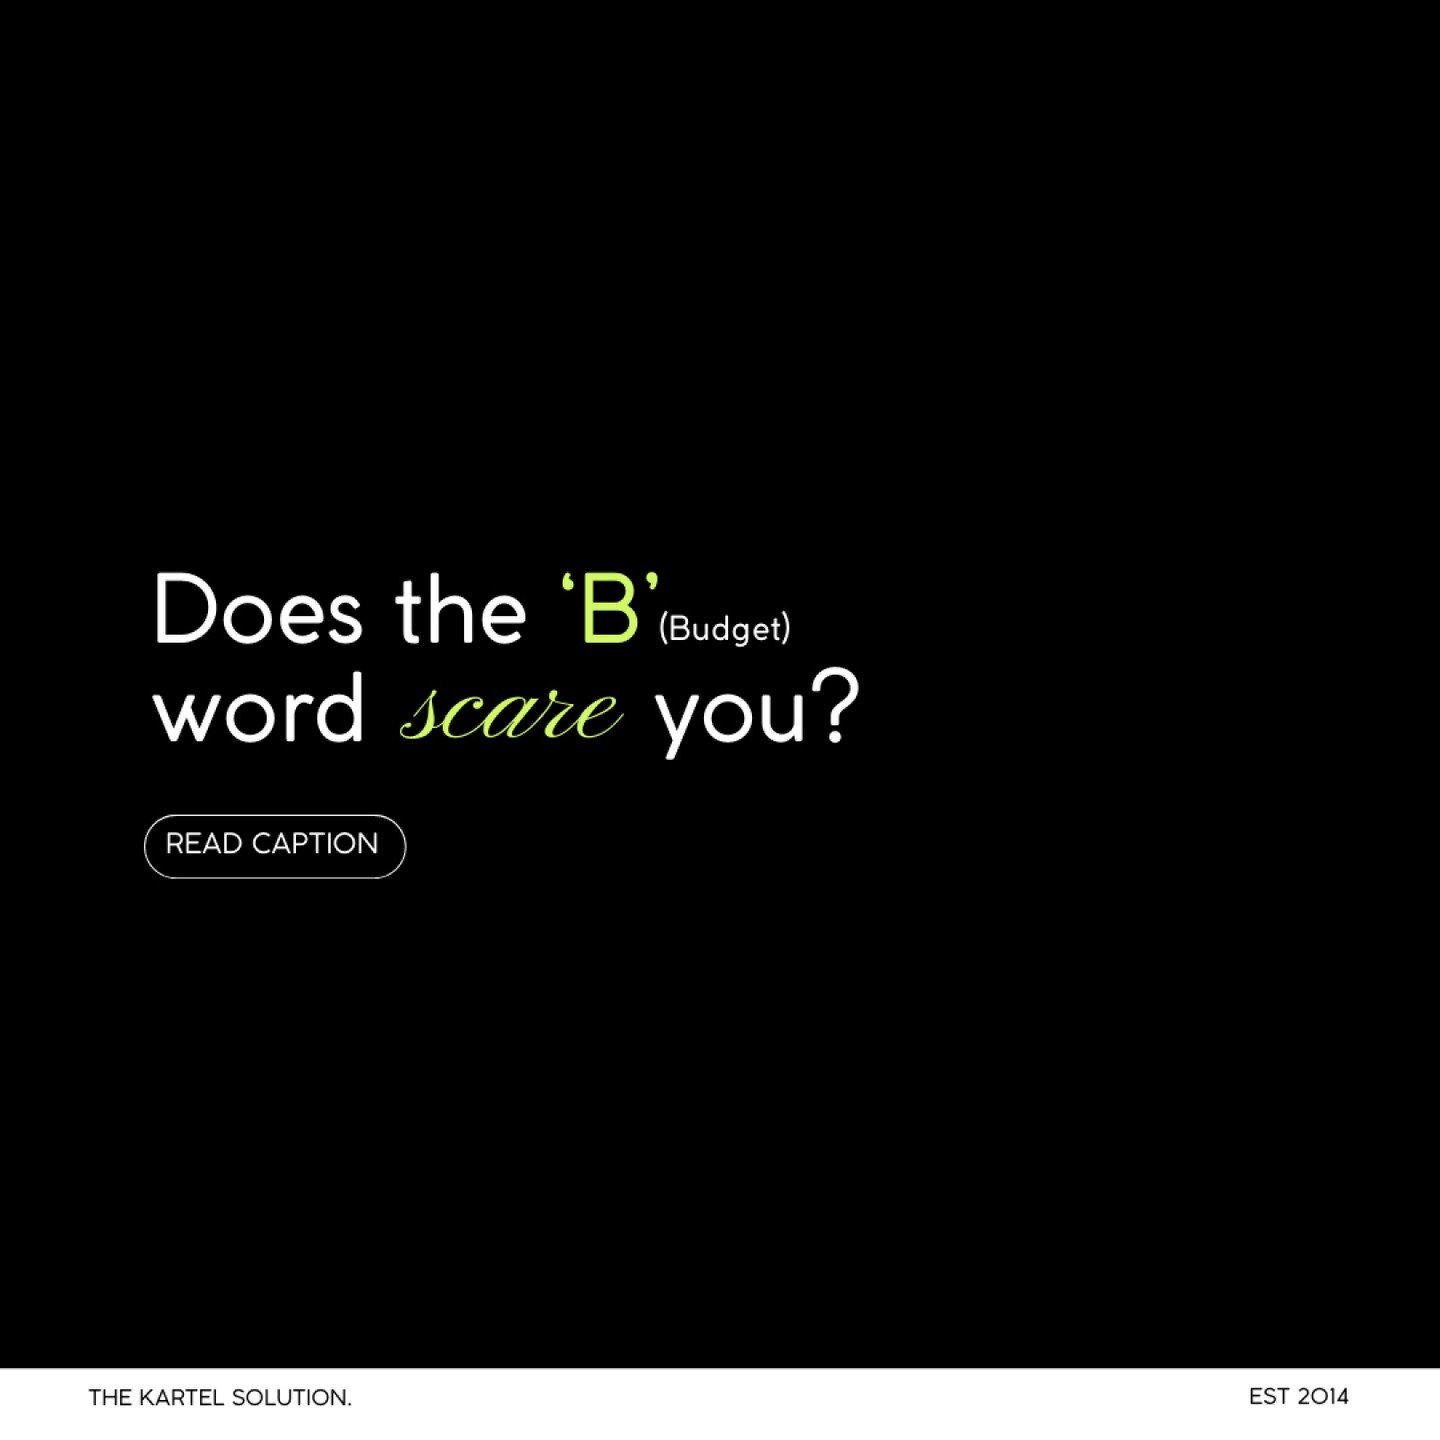 Does the B word scare you? 

Budgeting&mdash;it's a term that can evoke anxiety and uncertainty for many. Stepping into the world of budgeting can feel like diving into the unknown. But fear not! With a solid plan and a sprinkle of determination, you